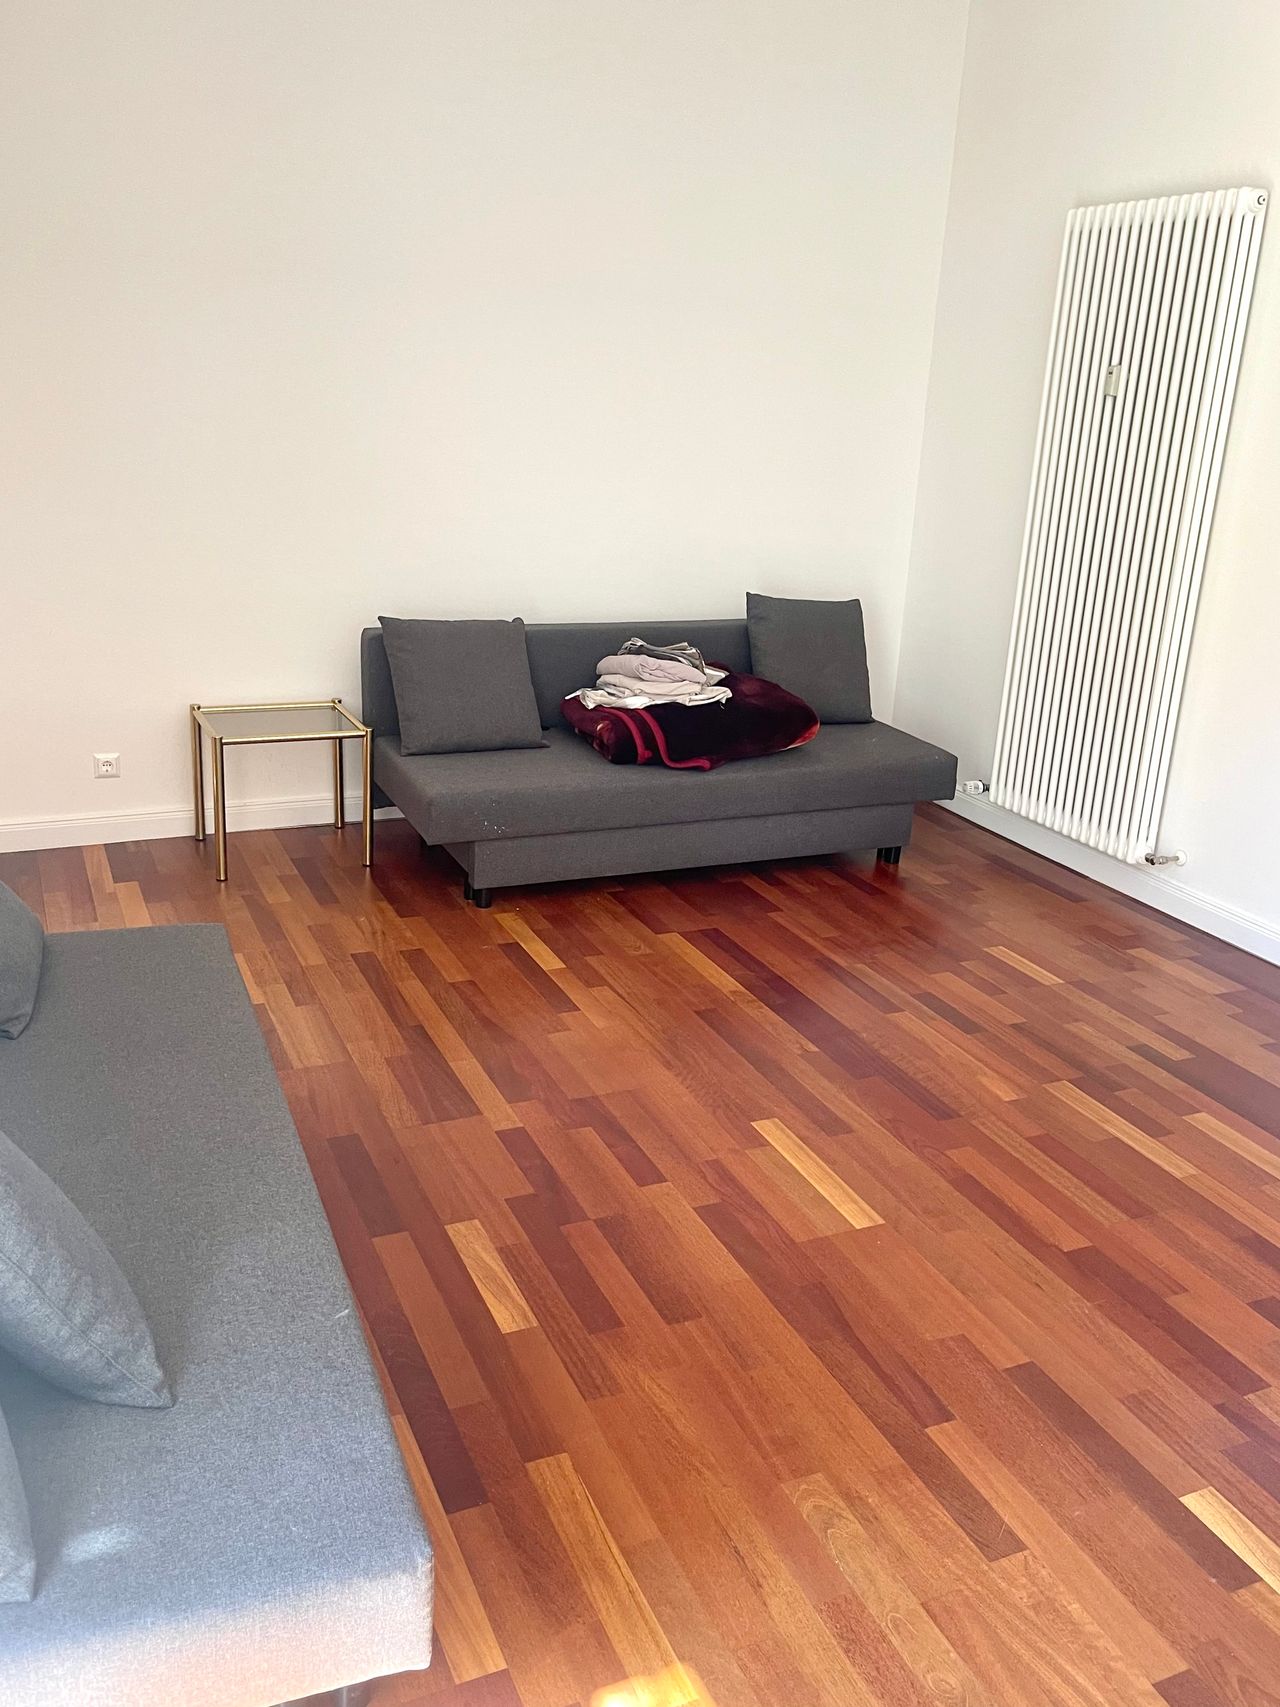 Lovely apartment in the most requested area of Berlin!